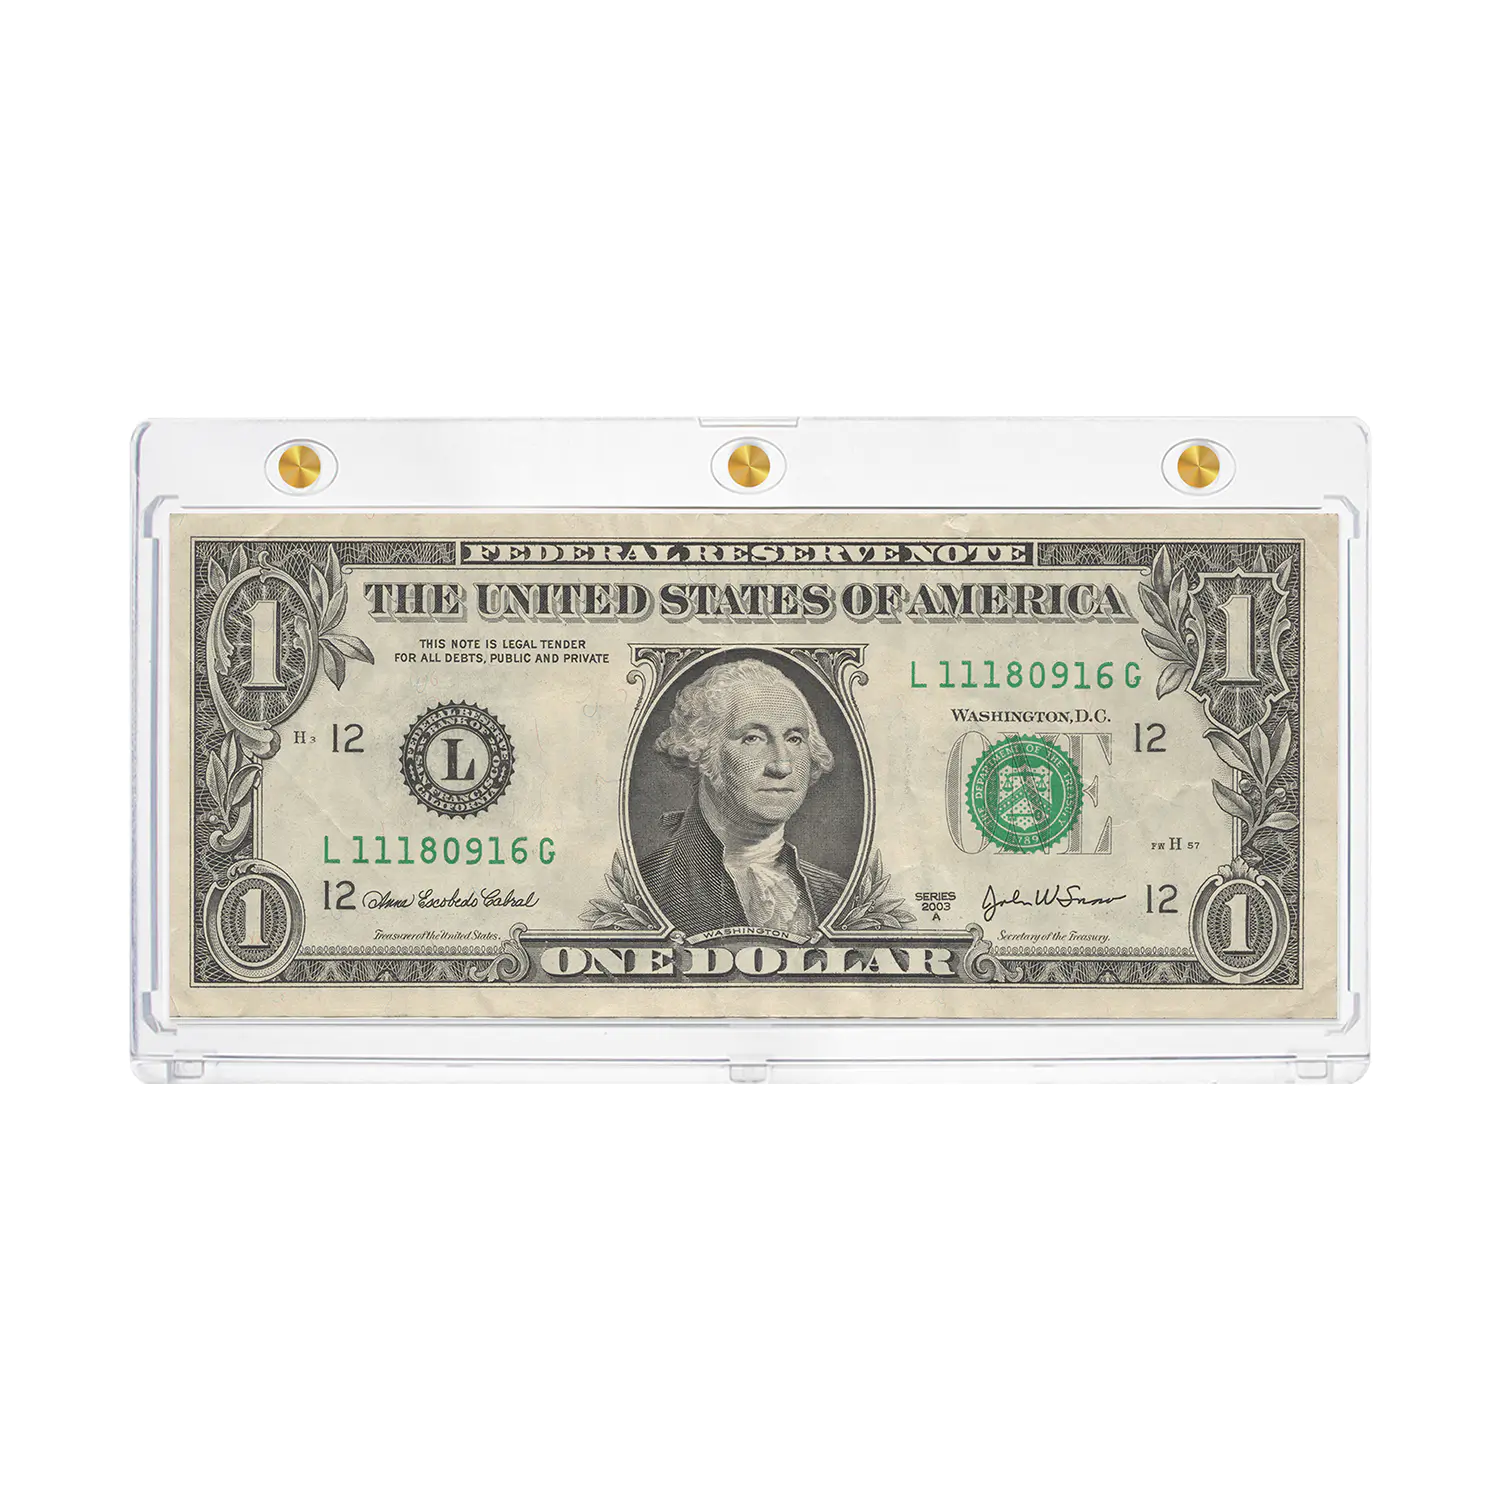 Banknote/Currency Magnetic Holders